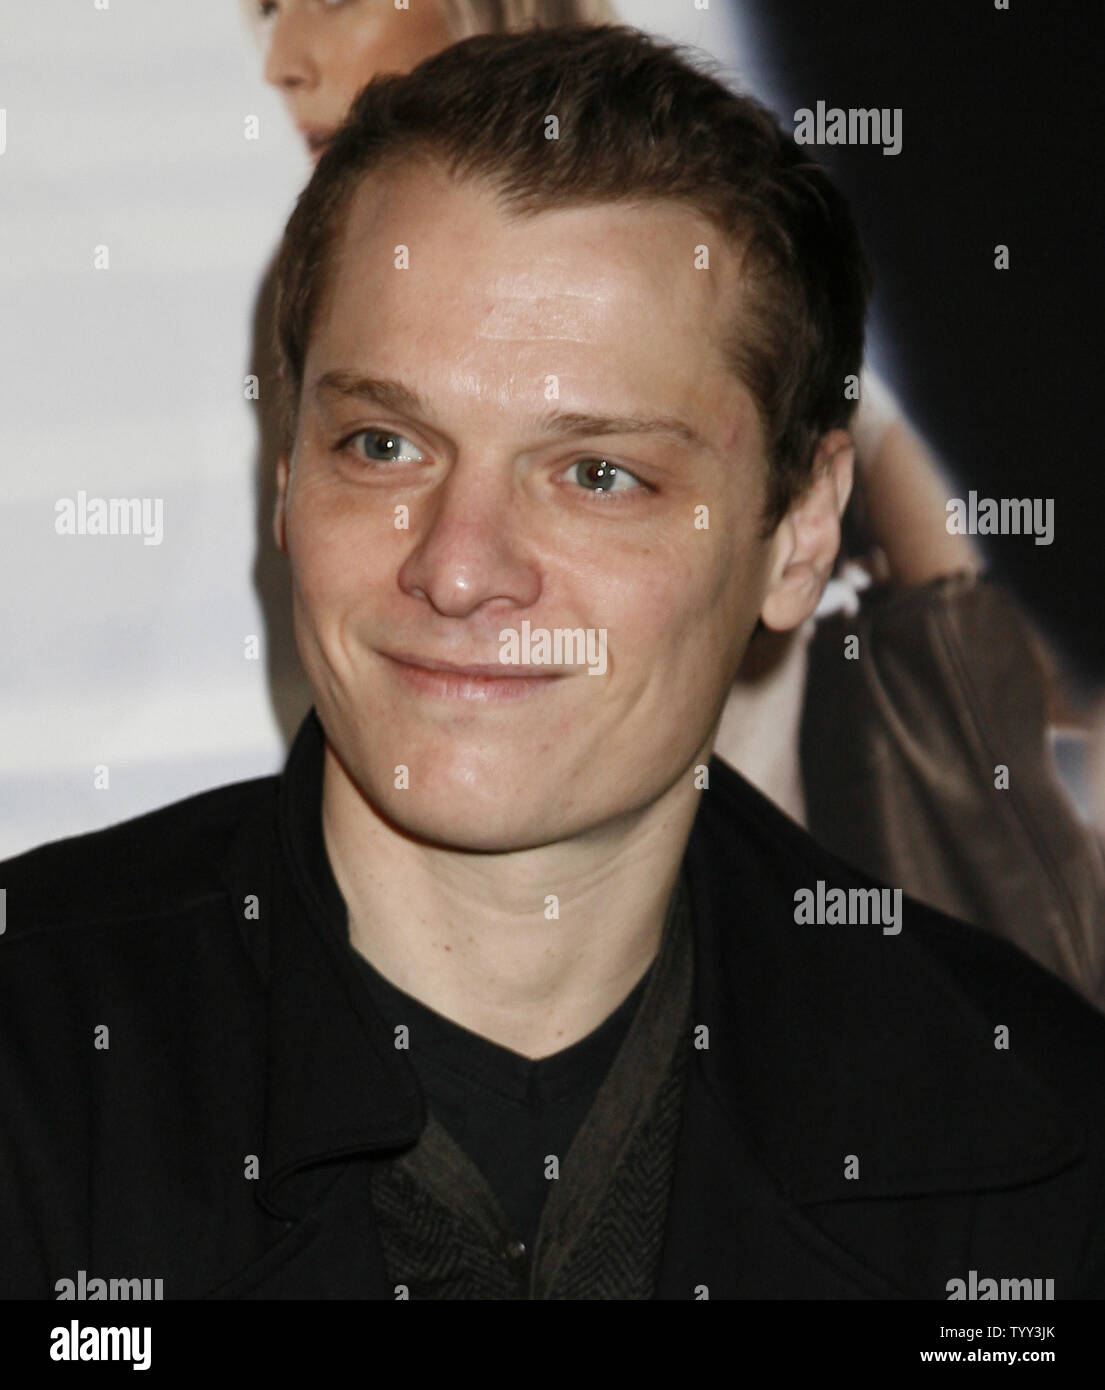 Singer Benabar arrives at the French premiere of the film "Pour Elle (Anything for Her)" in Paris on November 30, 2008.   (UPI Photo/David Silpa) Stock Photo